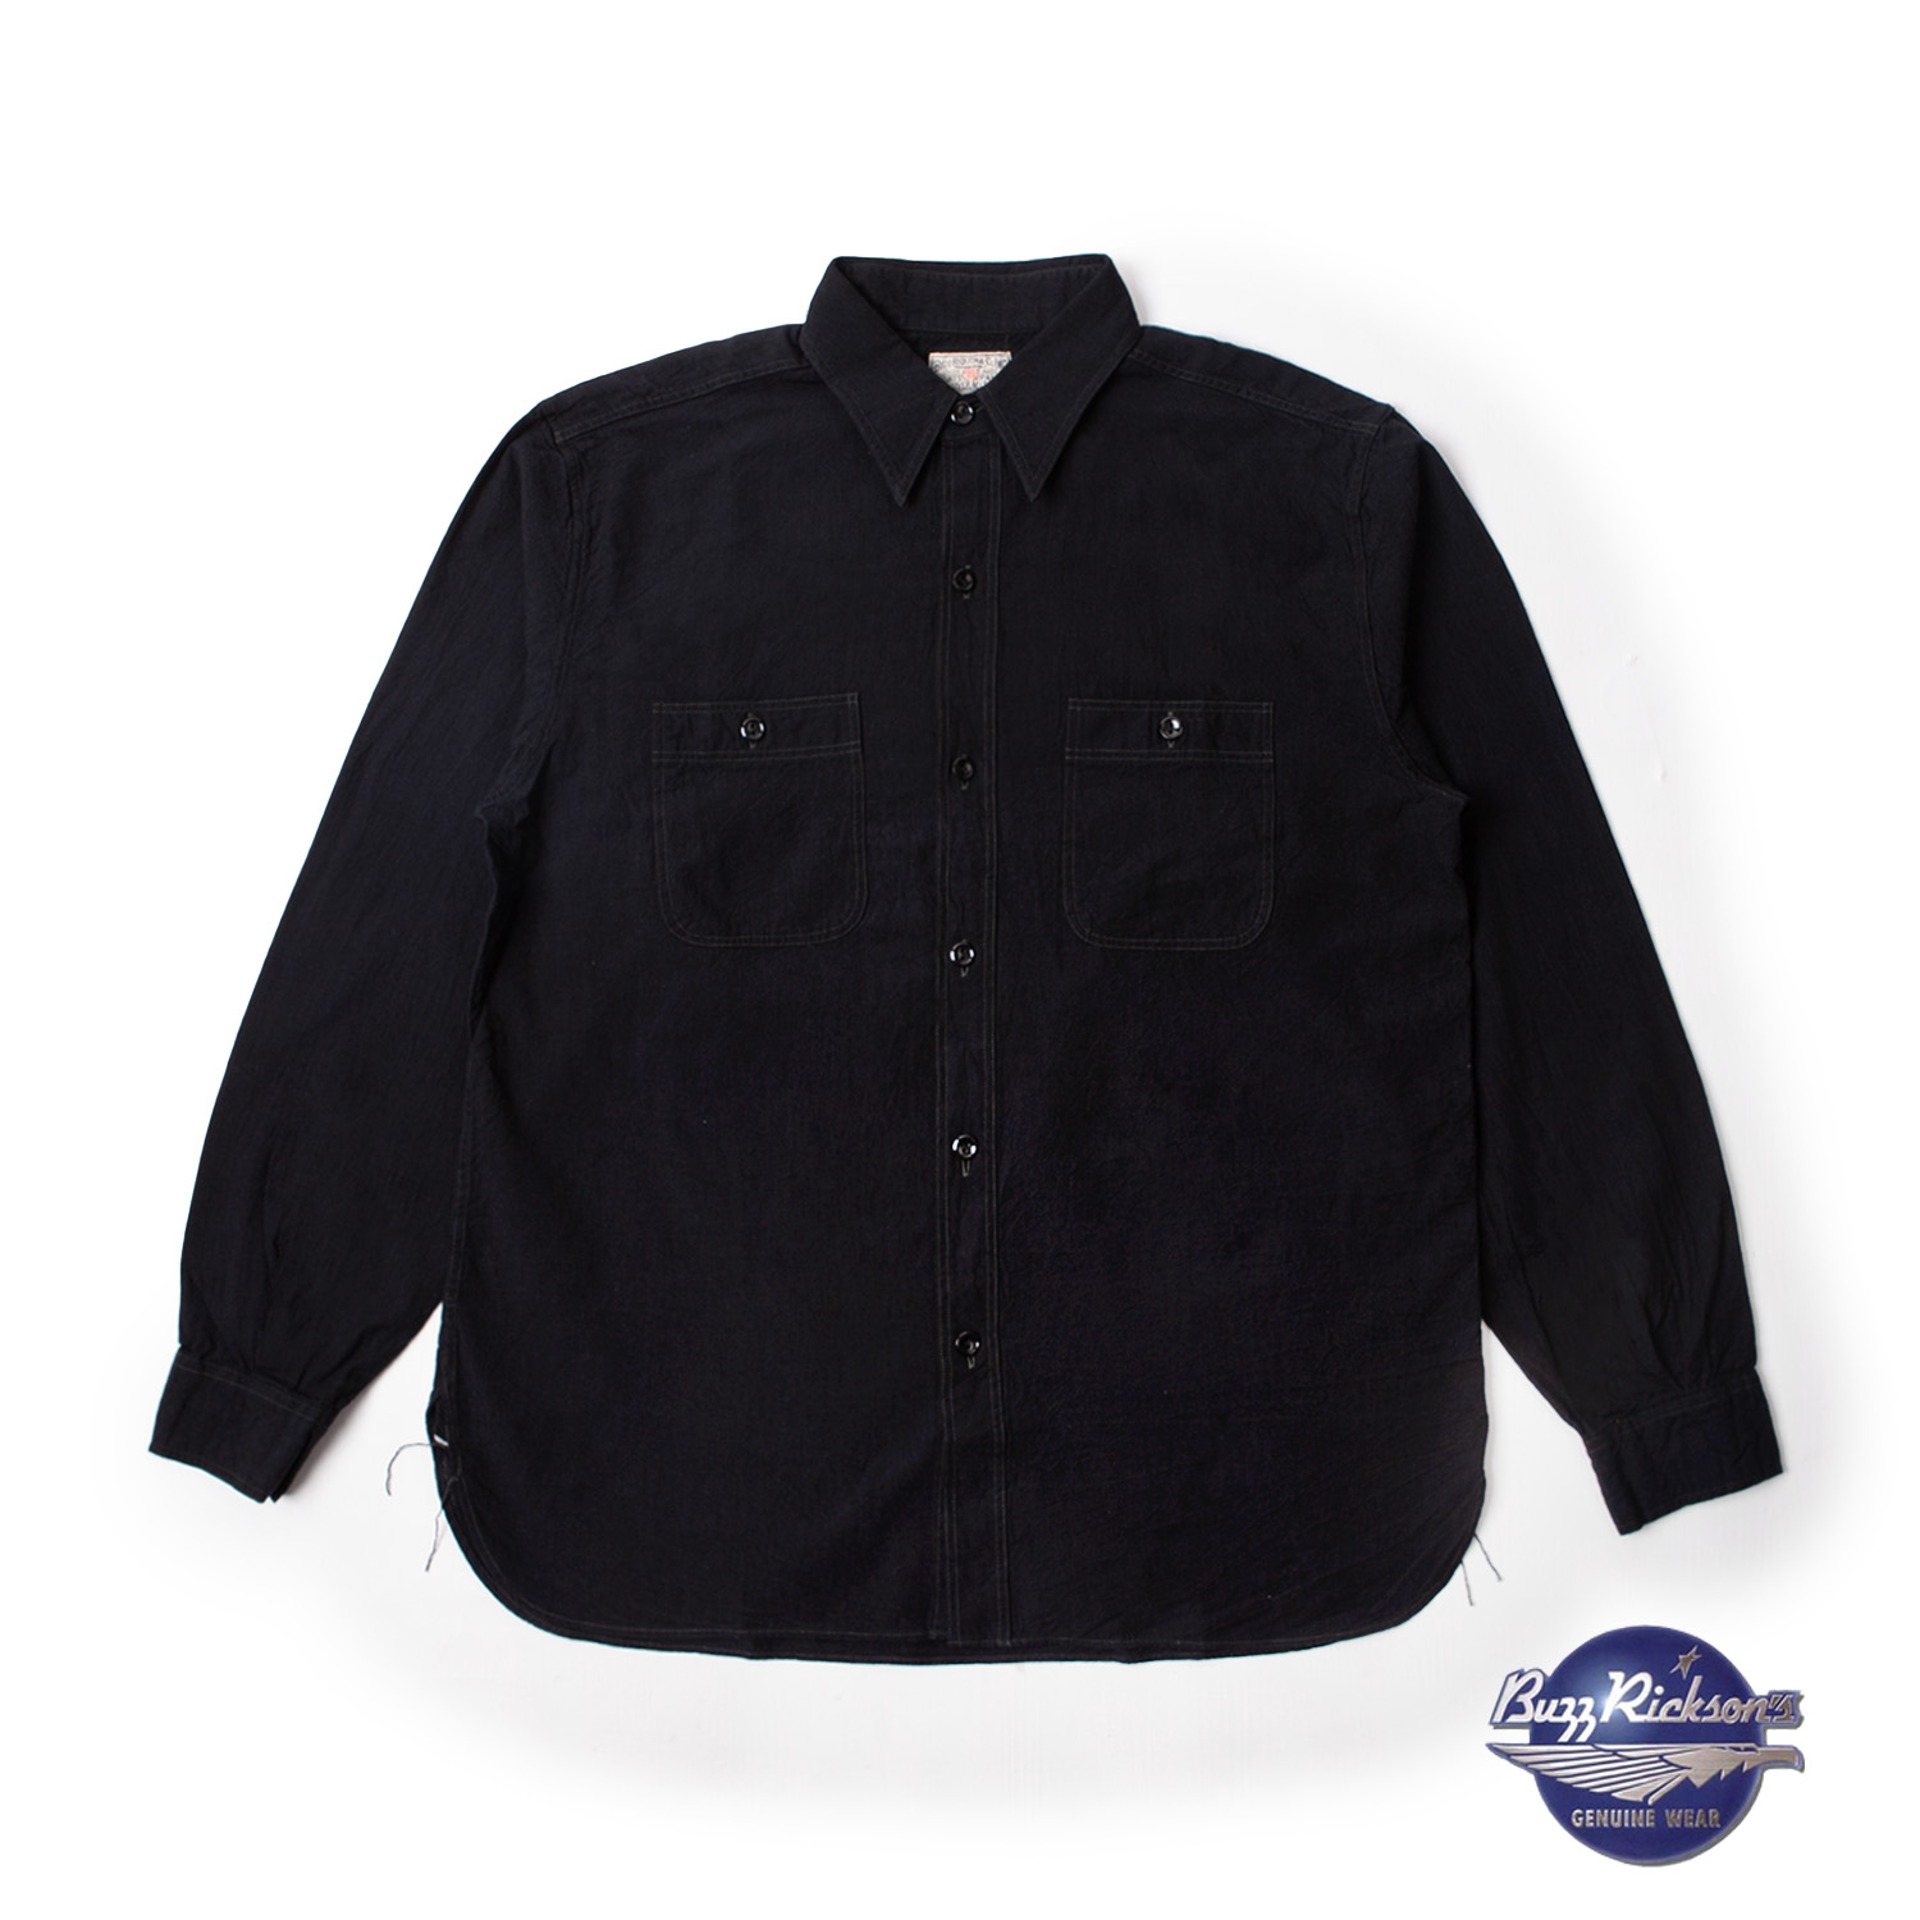 WILLIAM GIBSON COLLECTION BLACK CHAMBRAY WORK SHIRTS (Black)